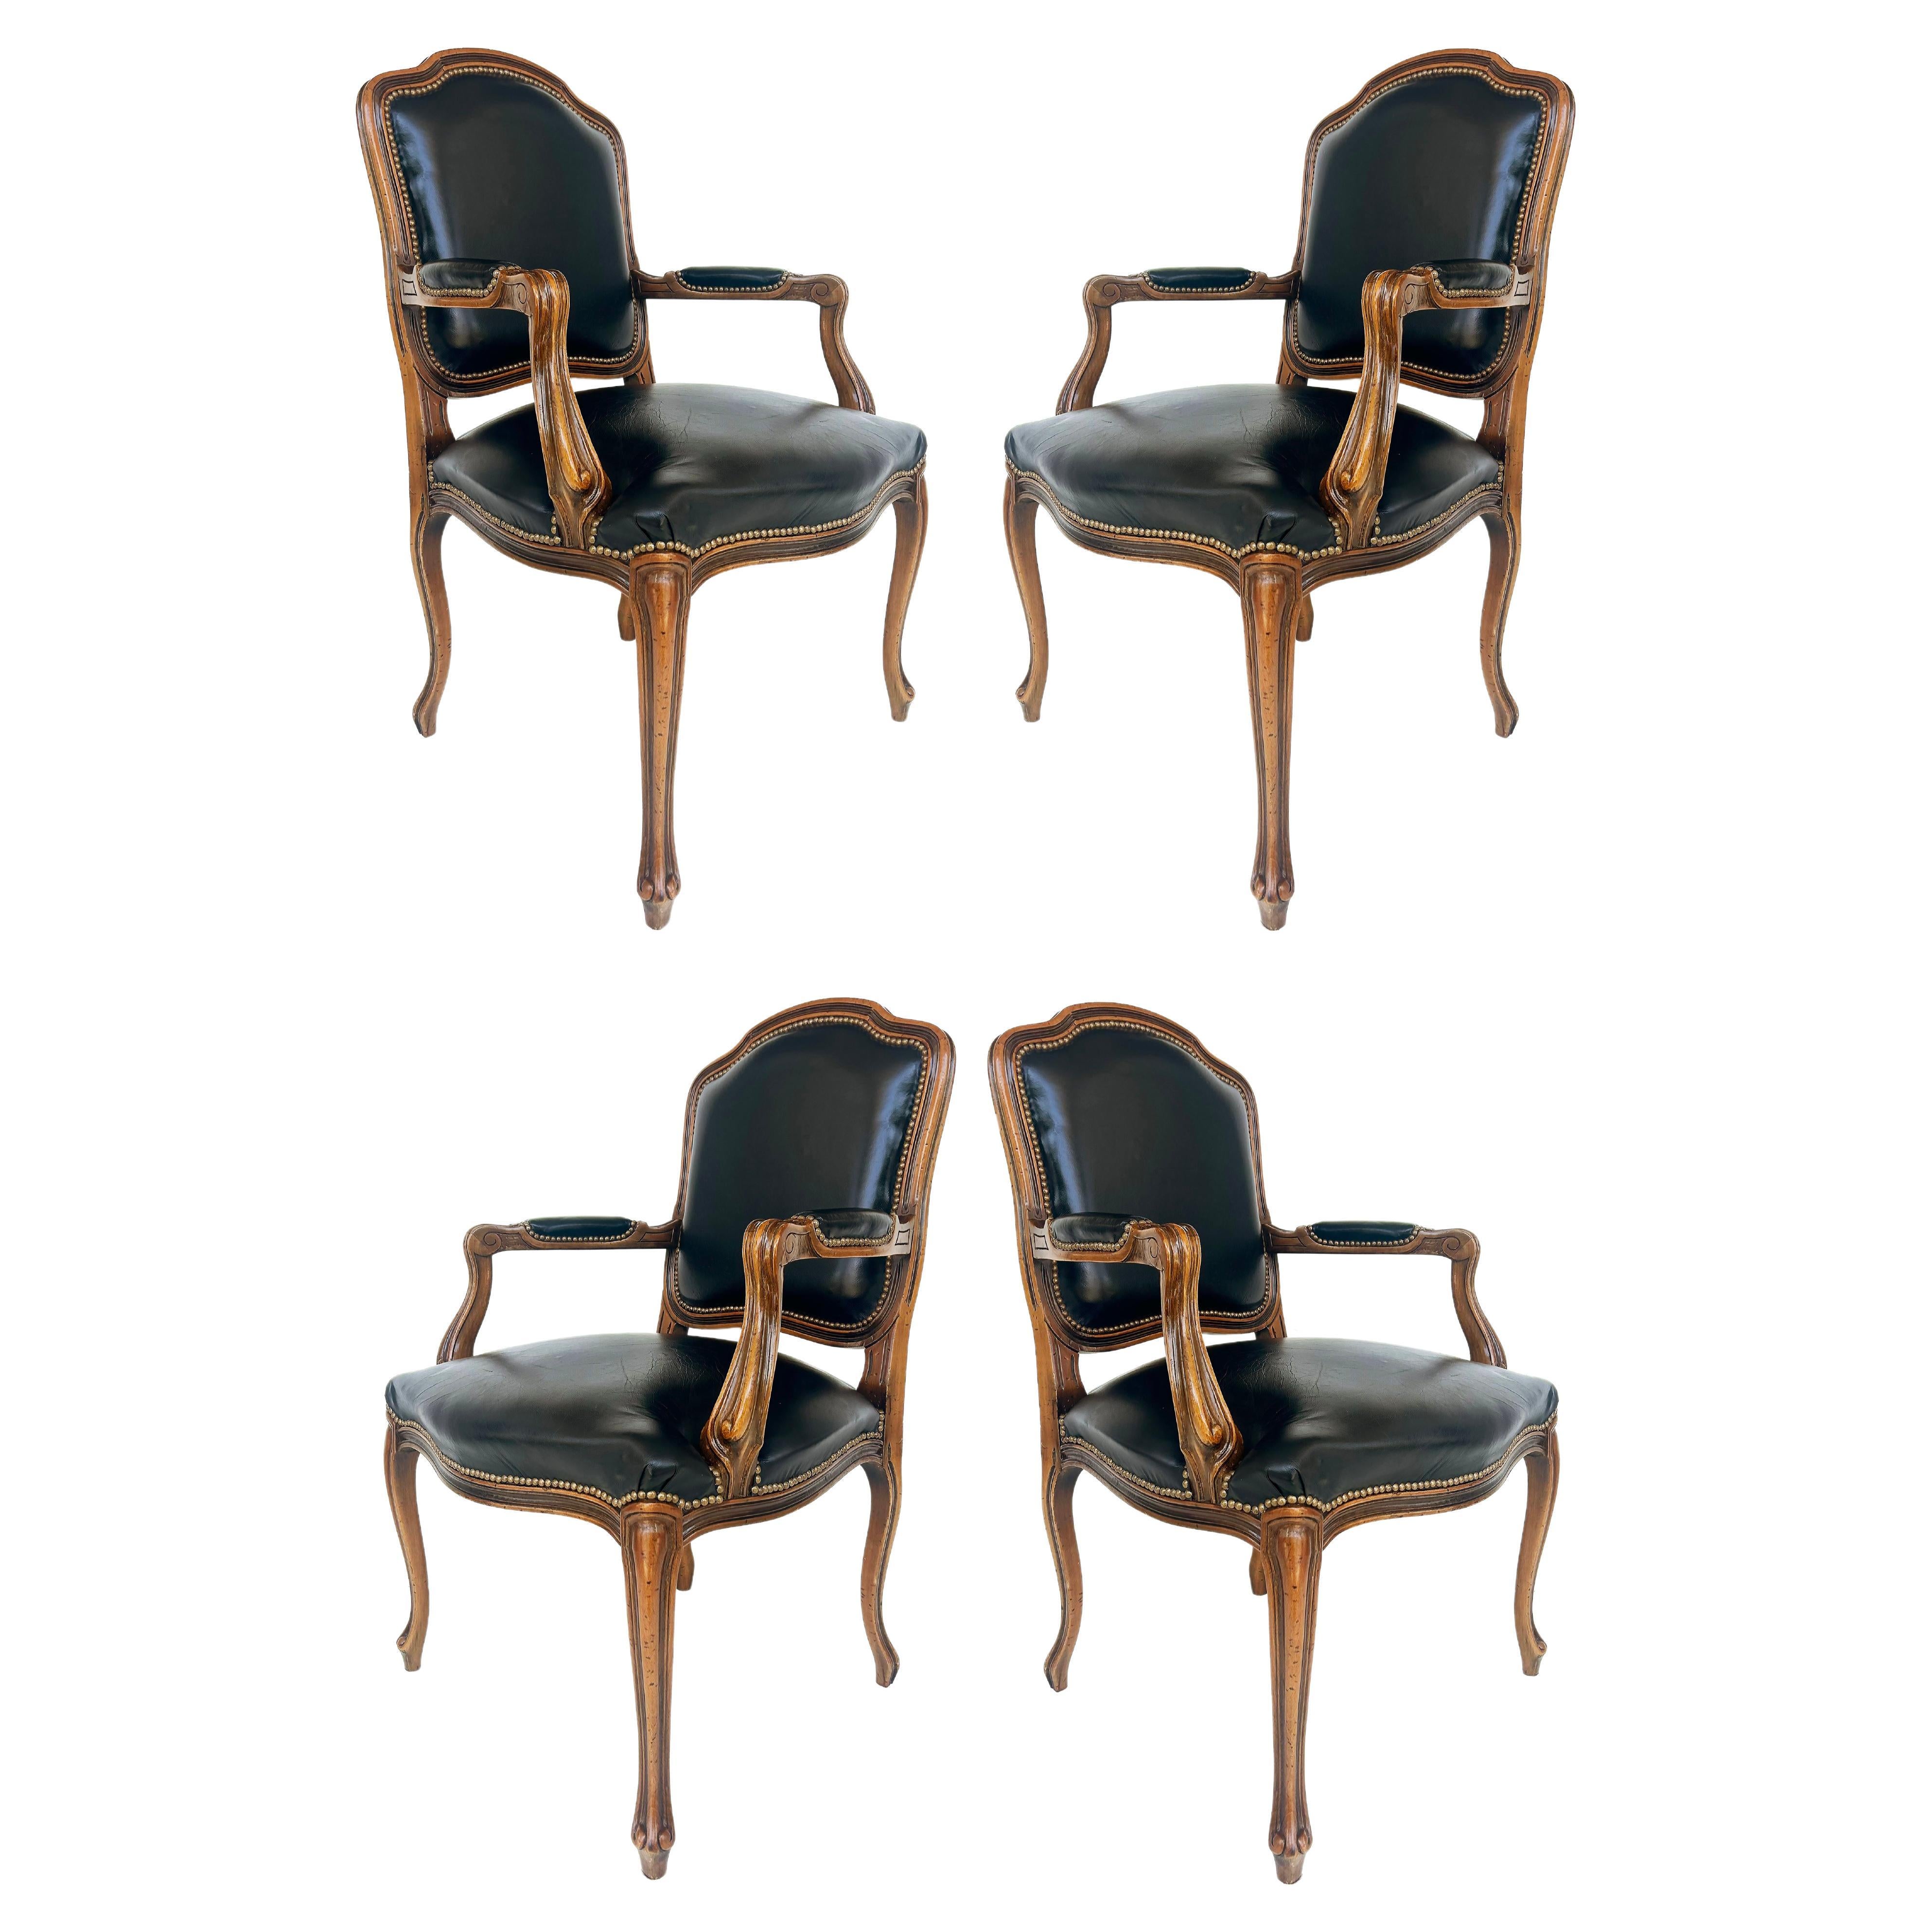 Vintage Italian Chateau D'Ax Leather Armchairs with Brass Nailhead Details, Pair For Sale